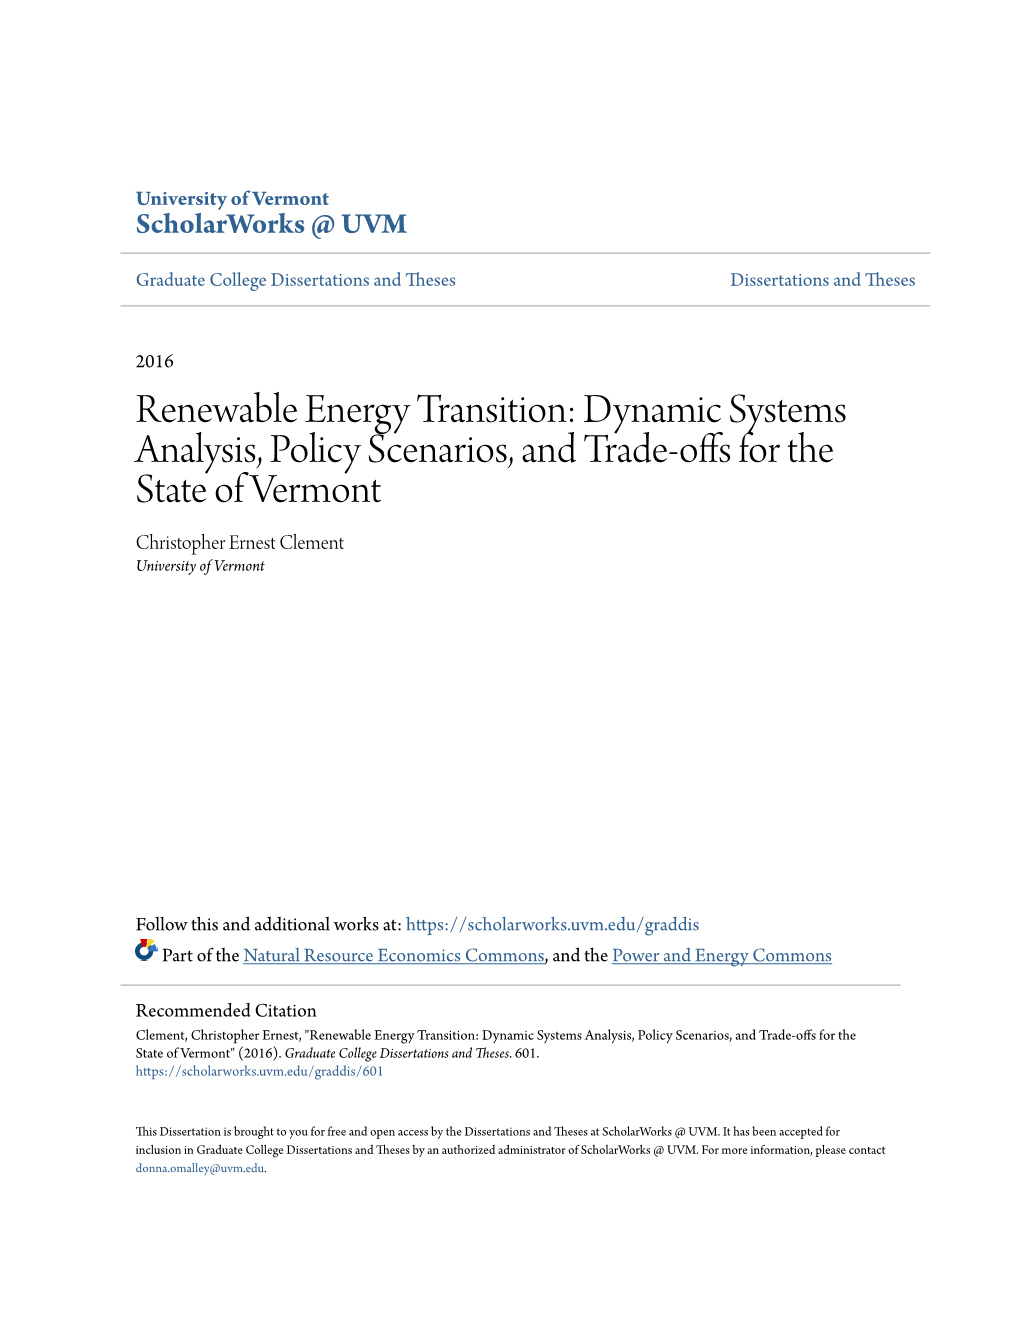 Renewable Energy Transition: Dynamic Systems Analysis, Policy Scenarios, and Trade-Offs for the State of Vermont Christopher Ernest Clement University of Vermont